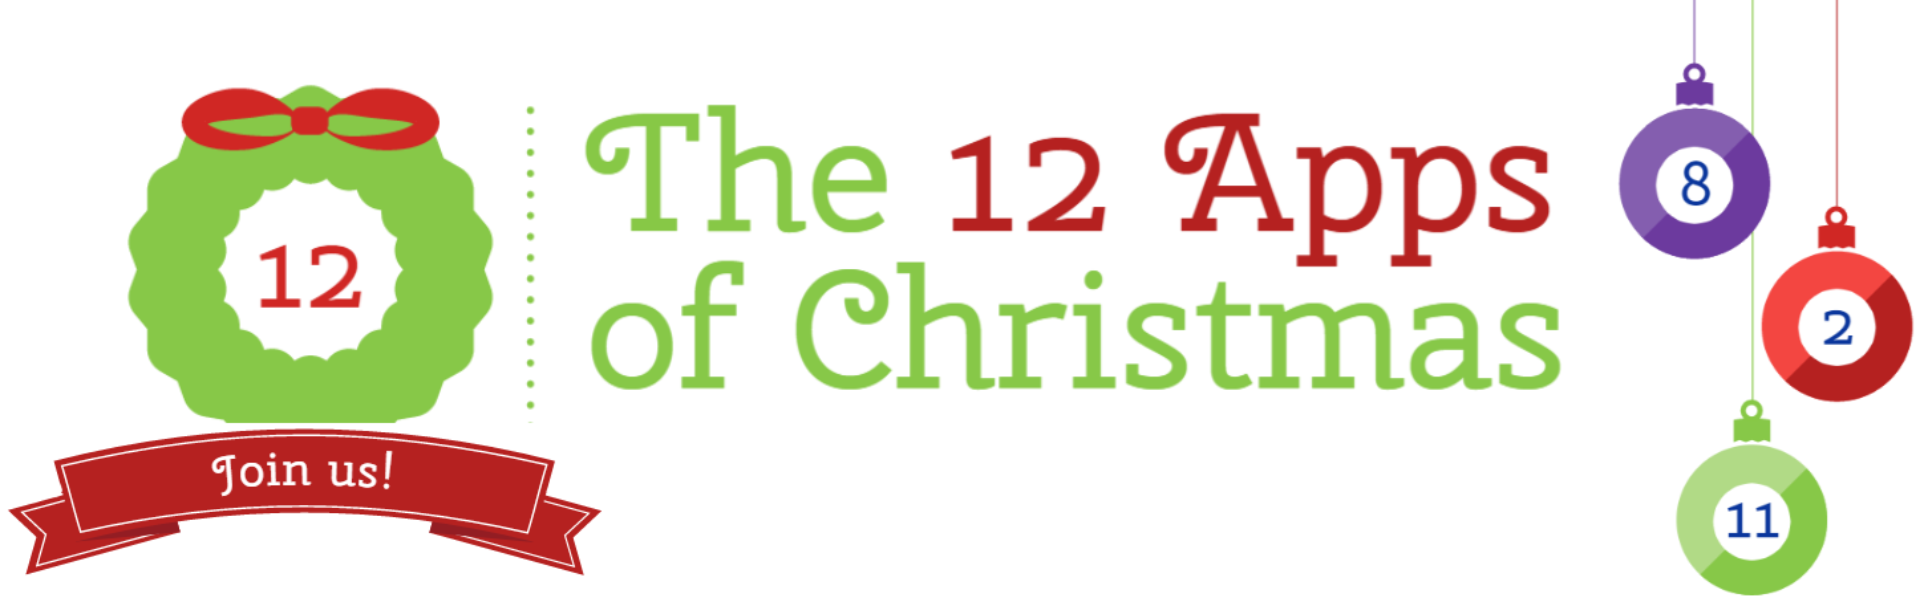 The logo for the 12 Apps of Christmas